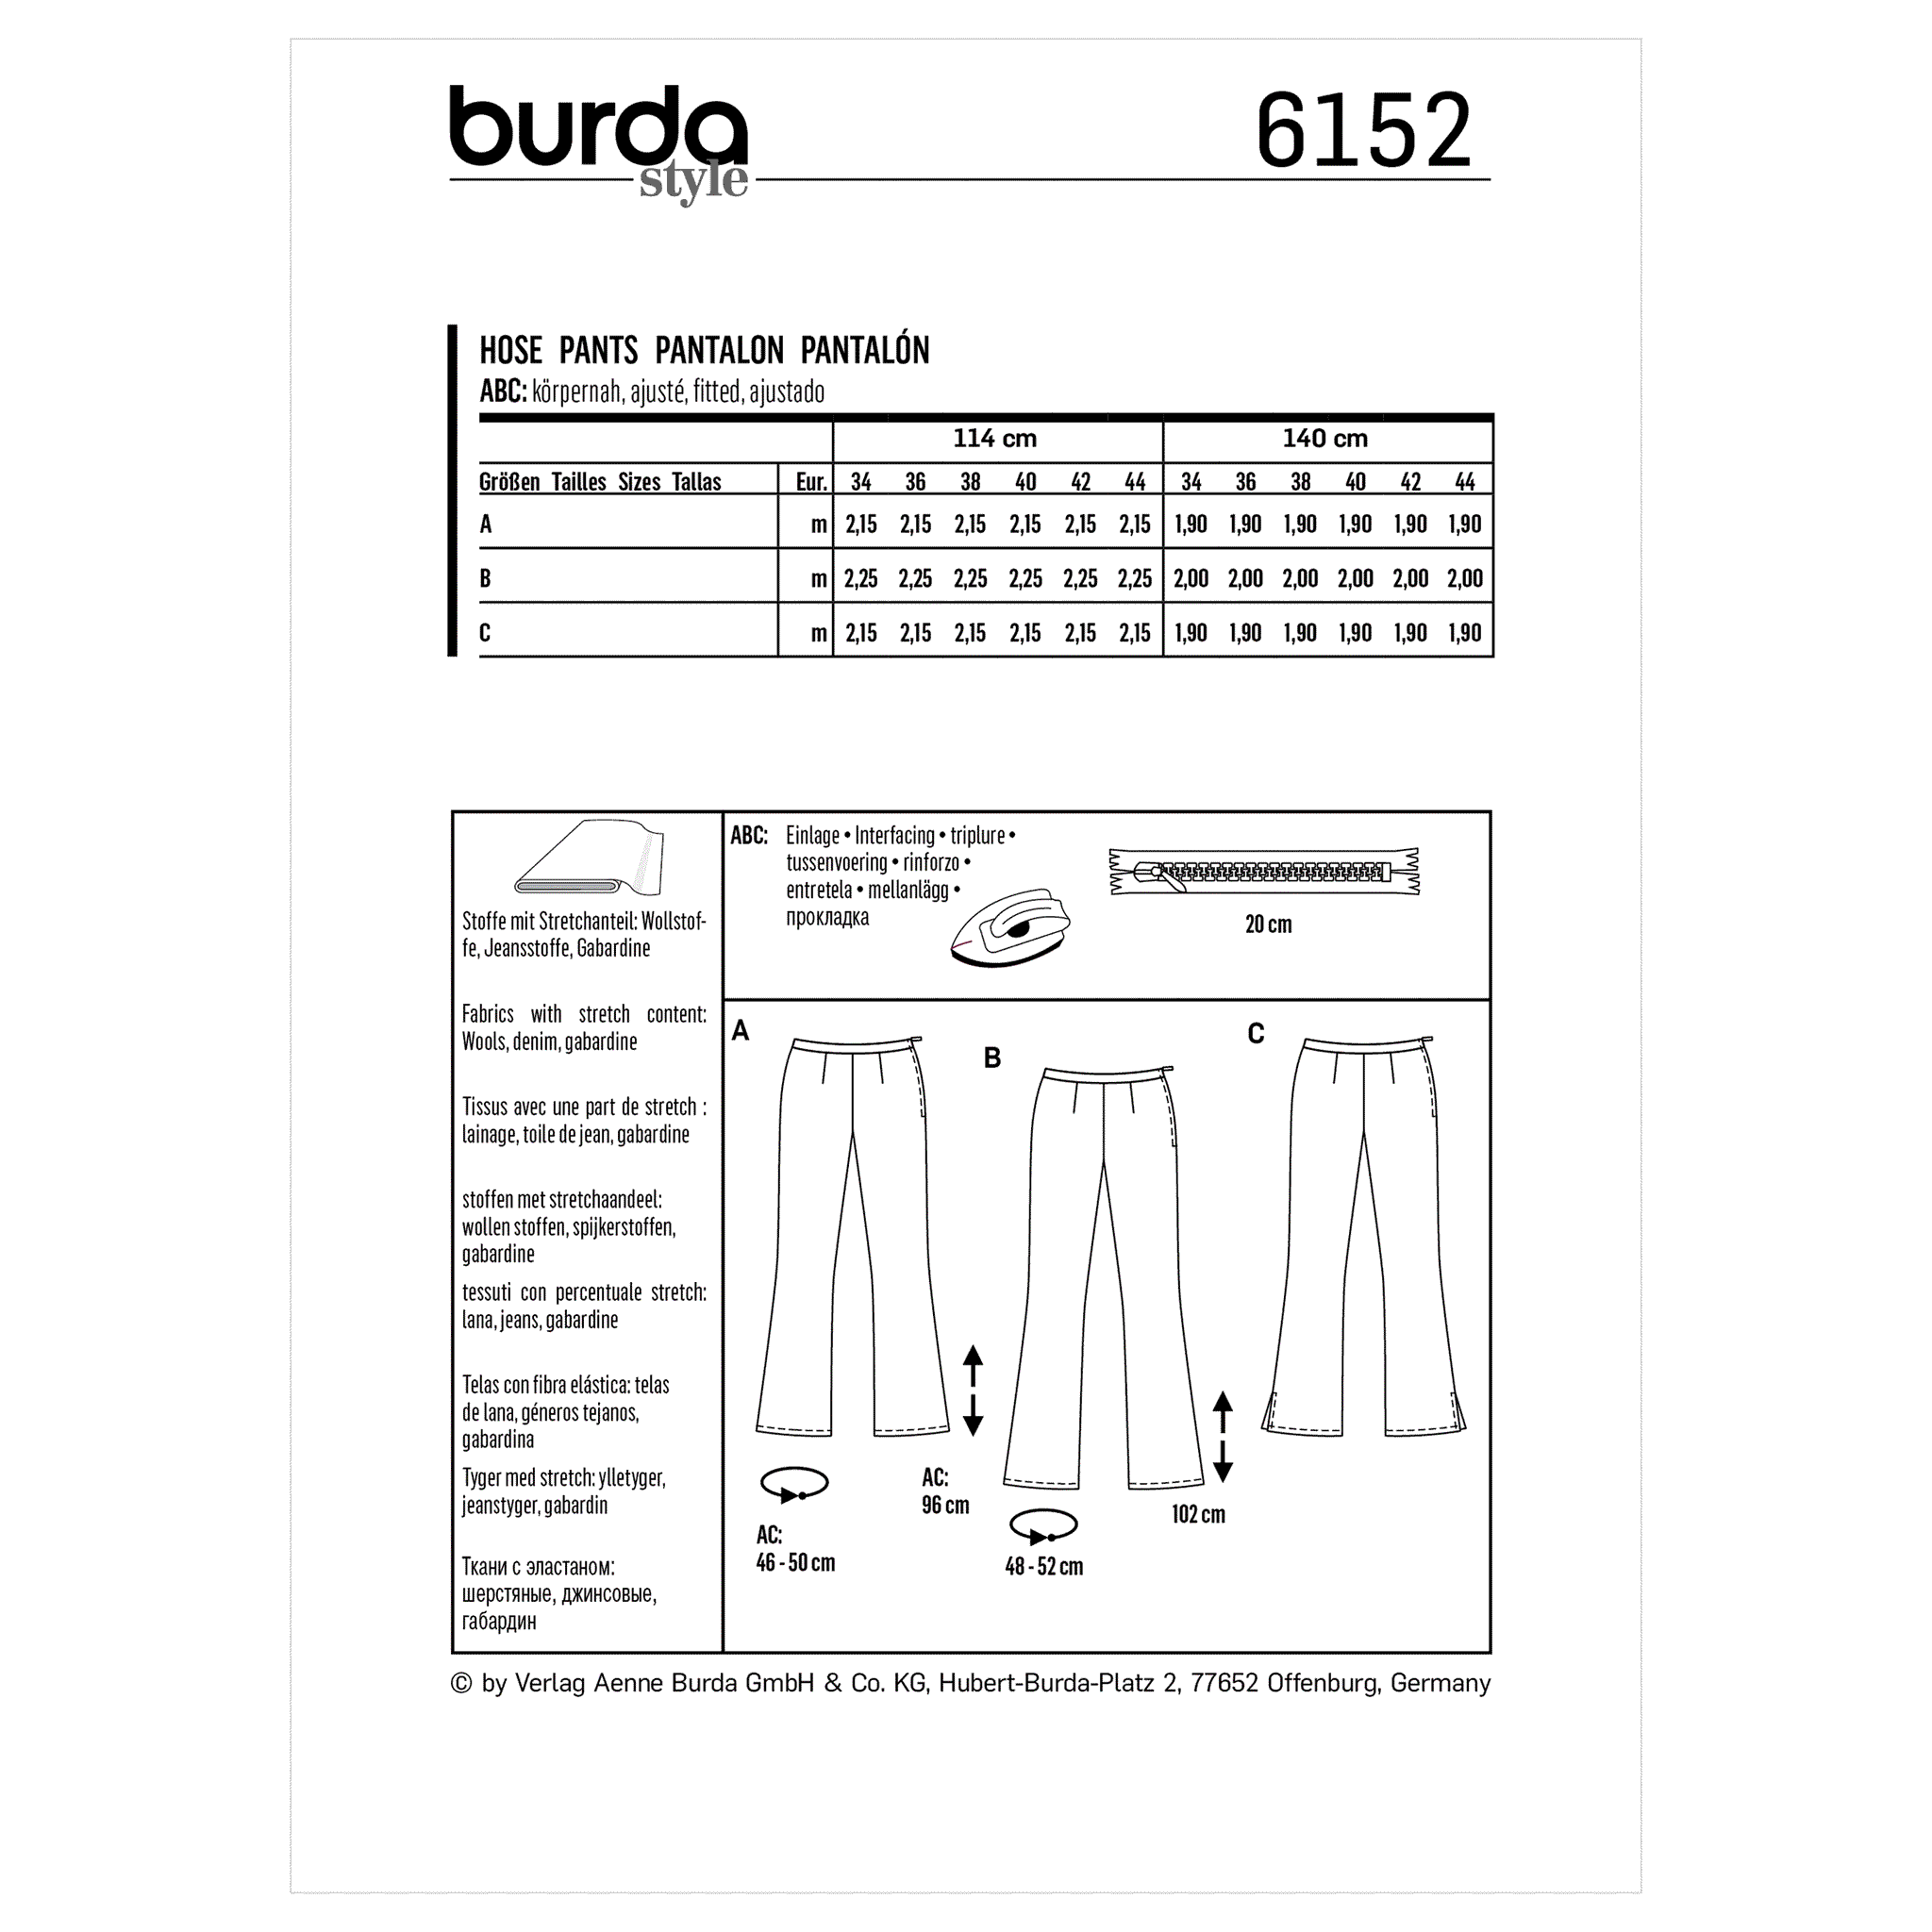 Burda Pattern 6152 Misses' Flared trousers or pants with a